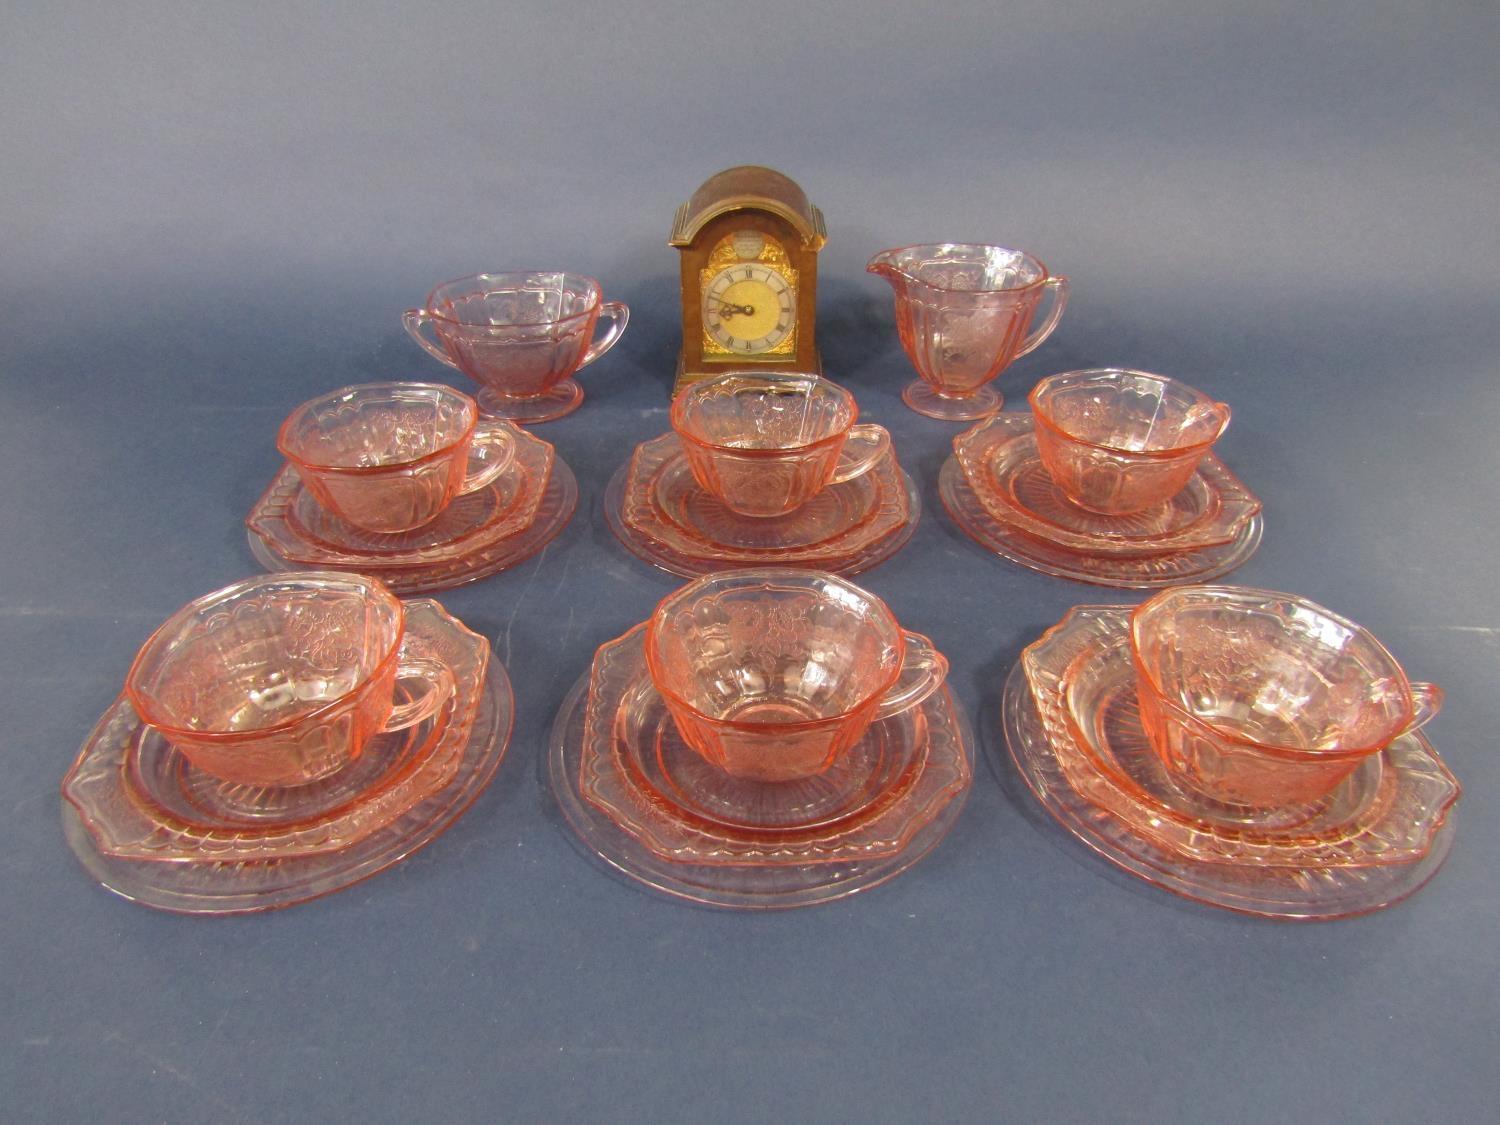 A collection of art deco pressed glass tea wares, together with a miniature bracket type clock (a